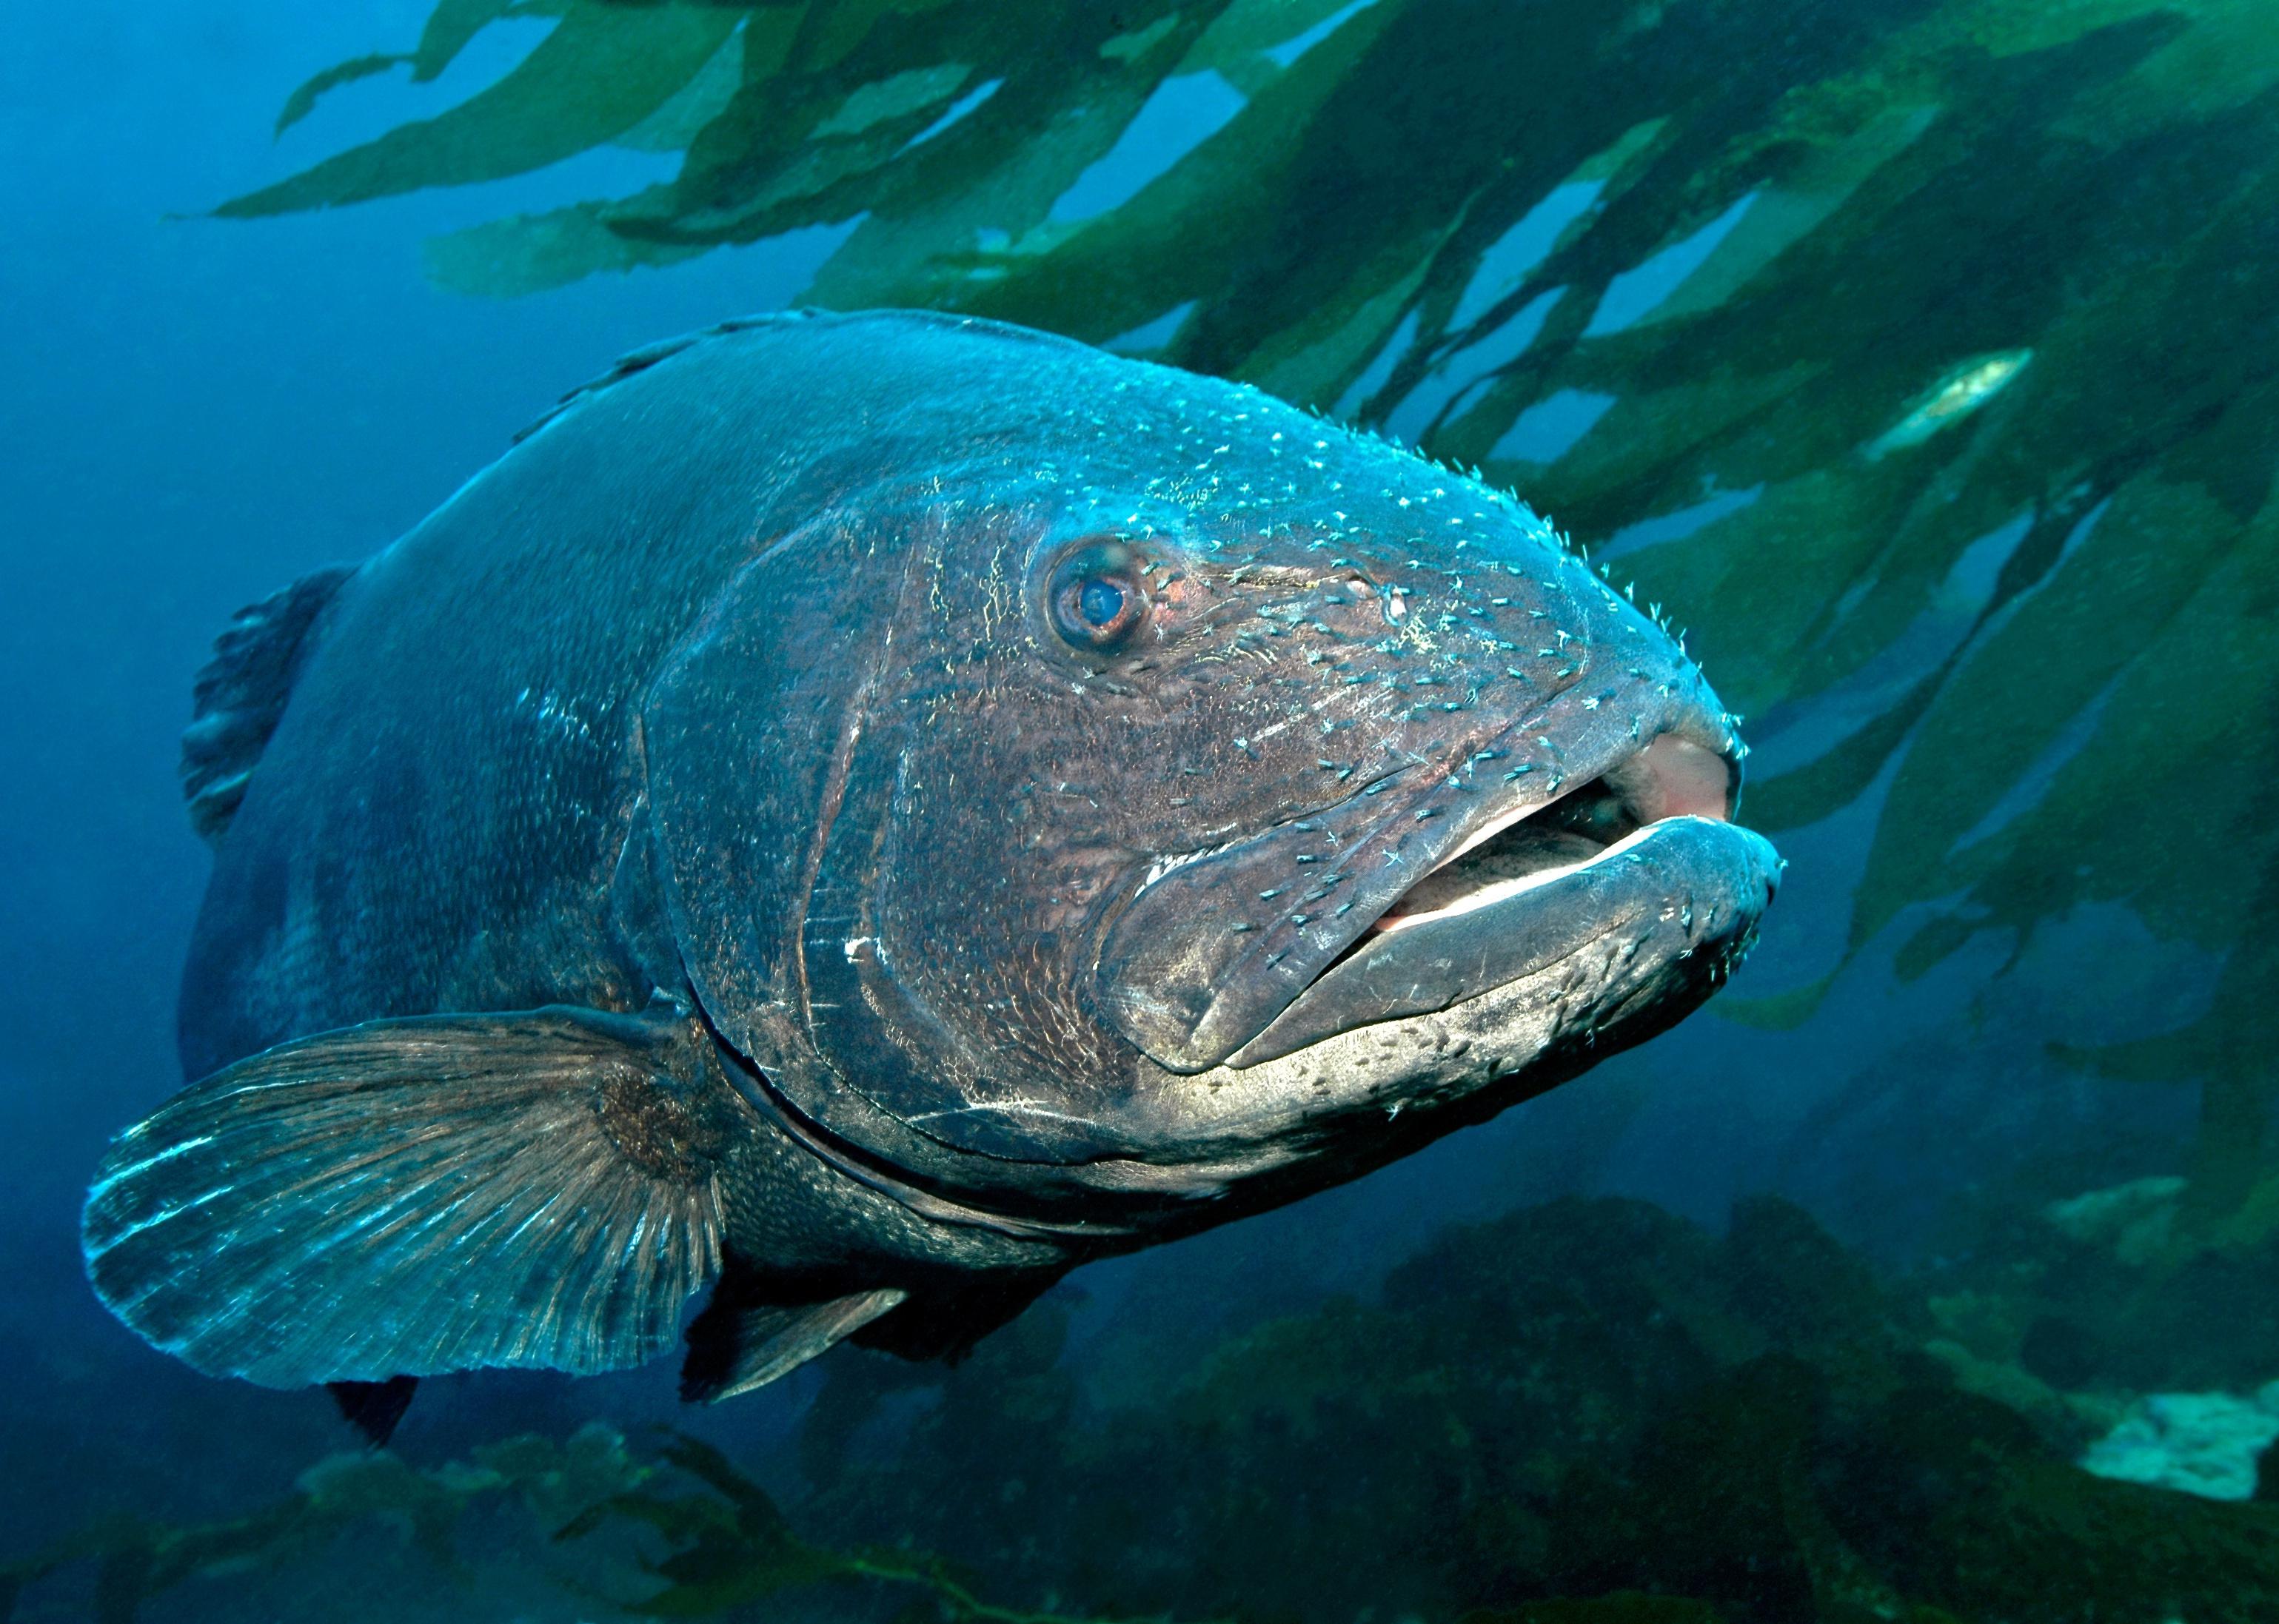 A rare giant black seabass with parasites attached to its head swims.